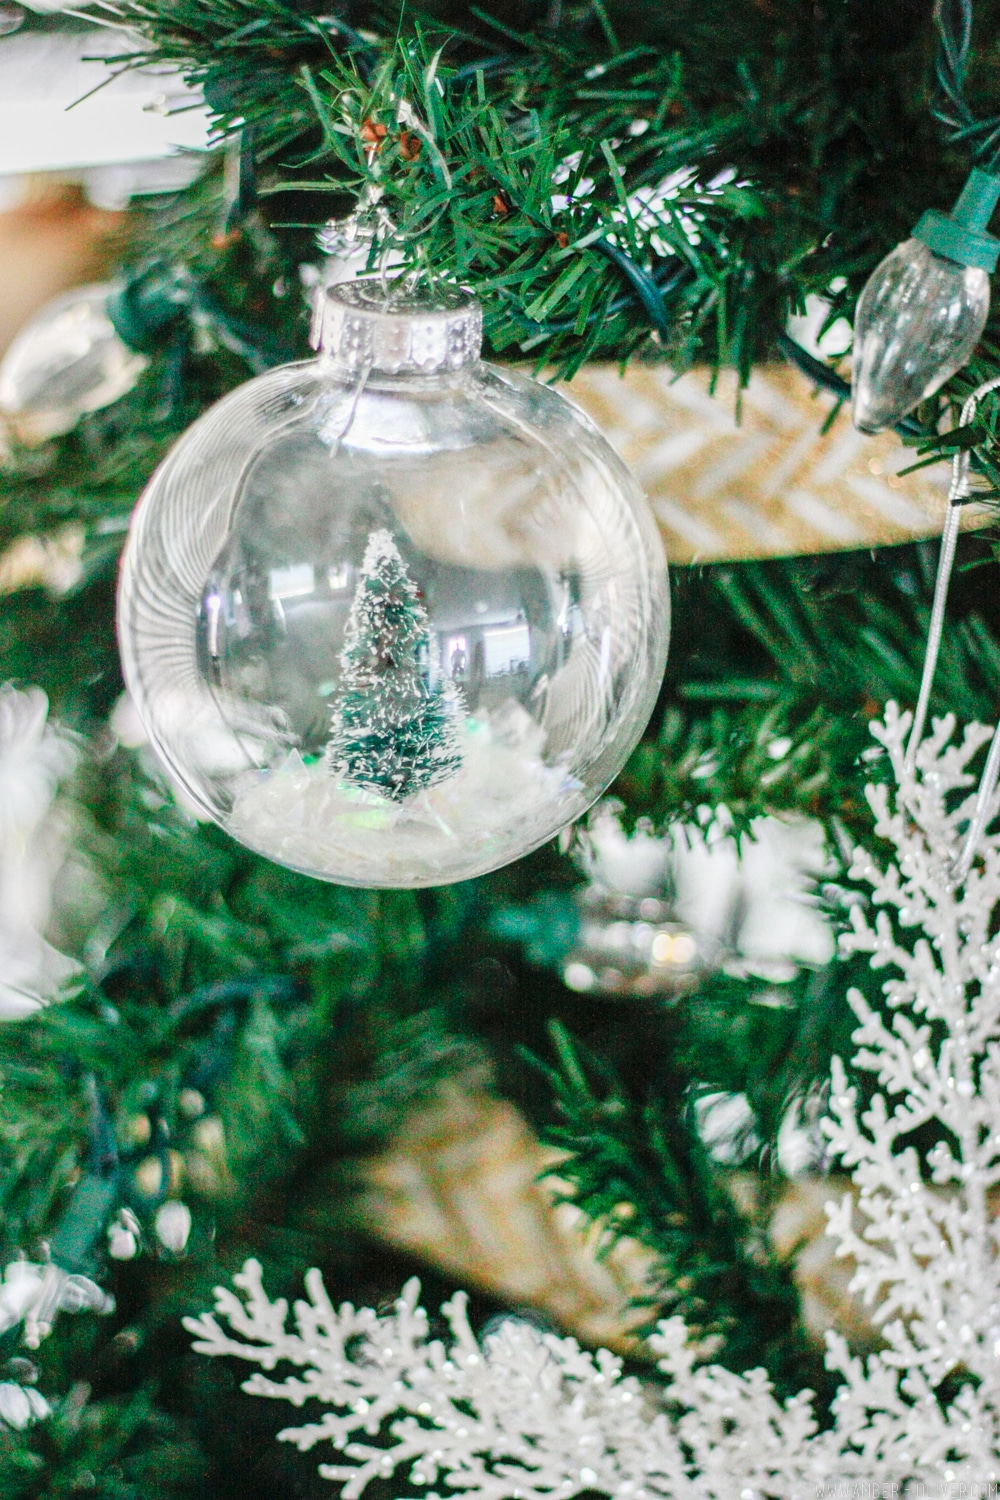 DIY Snow Globe Ornament - How to fill clear ornament with a bottle brush tree!